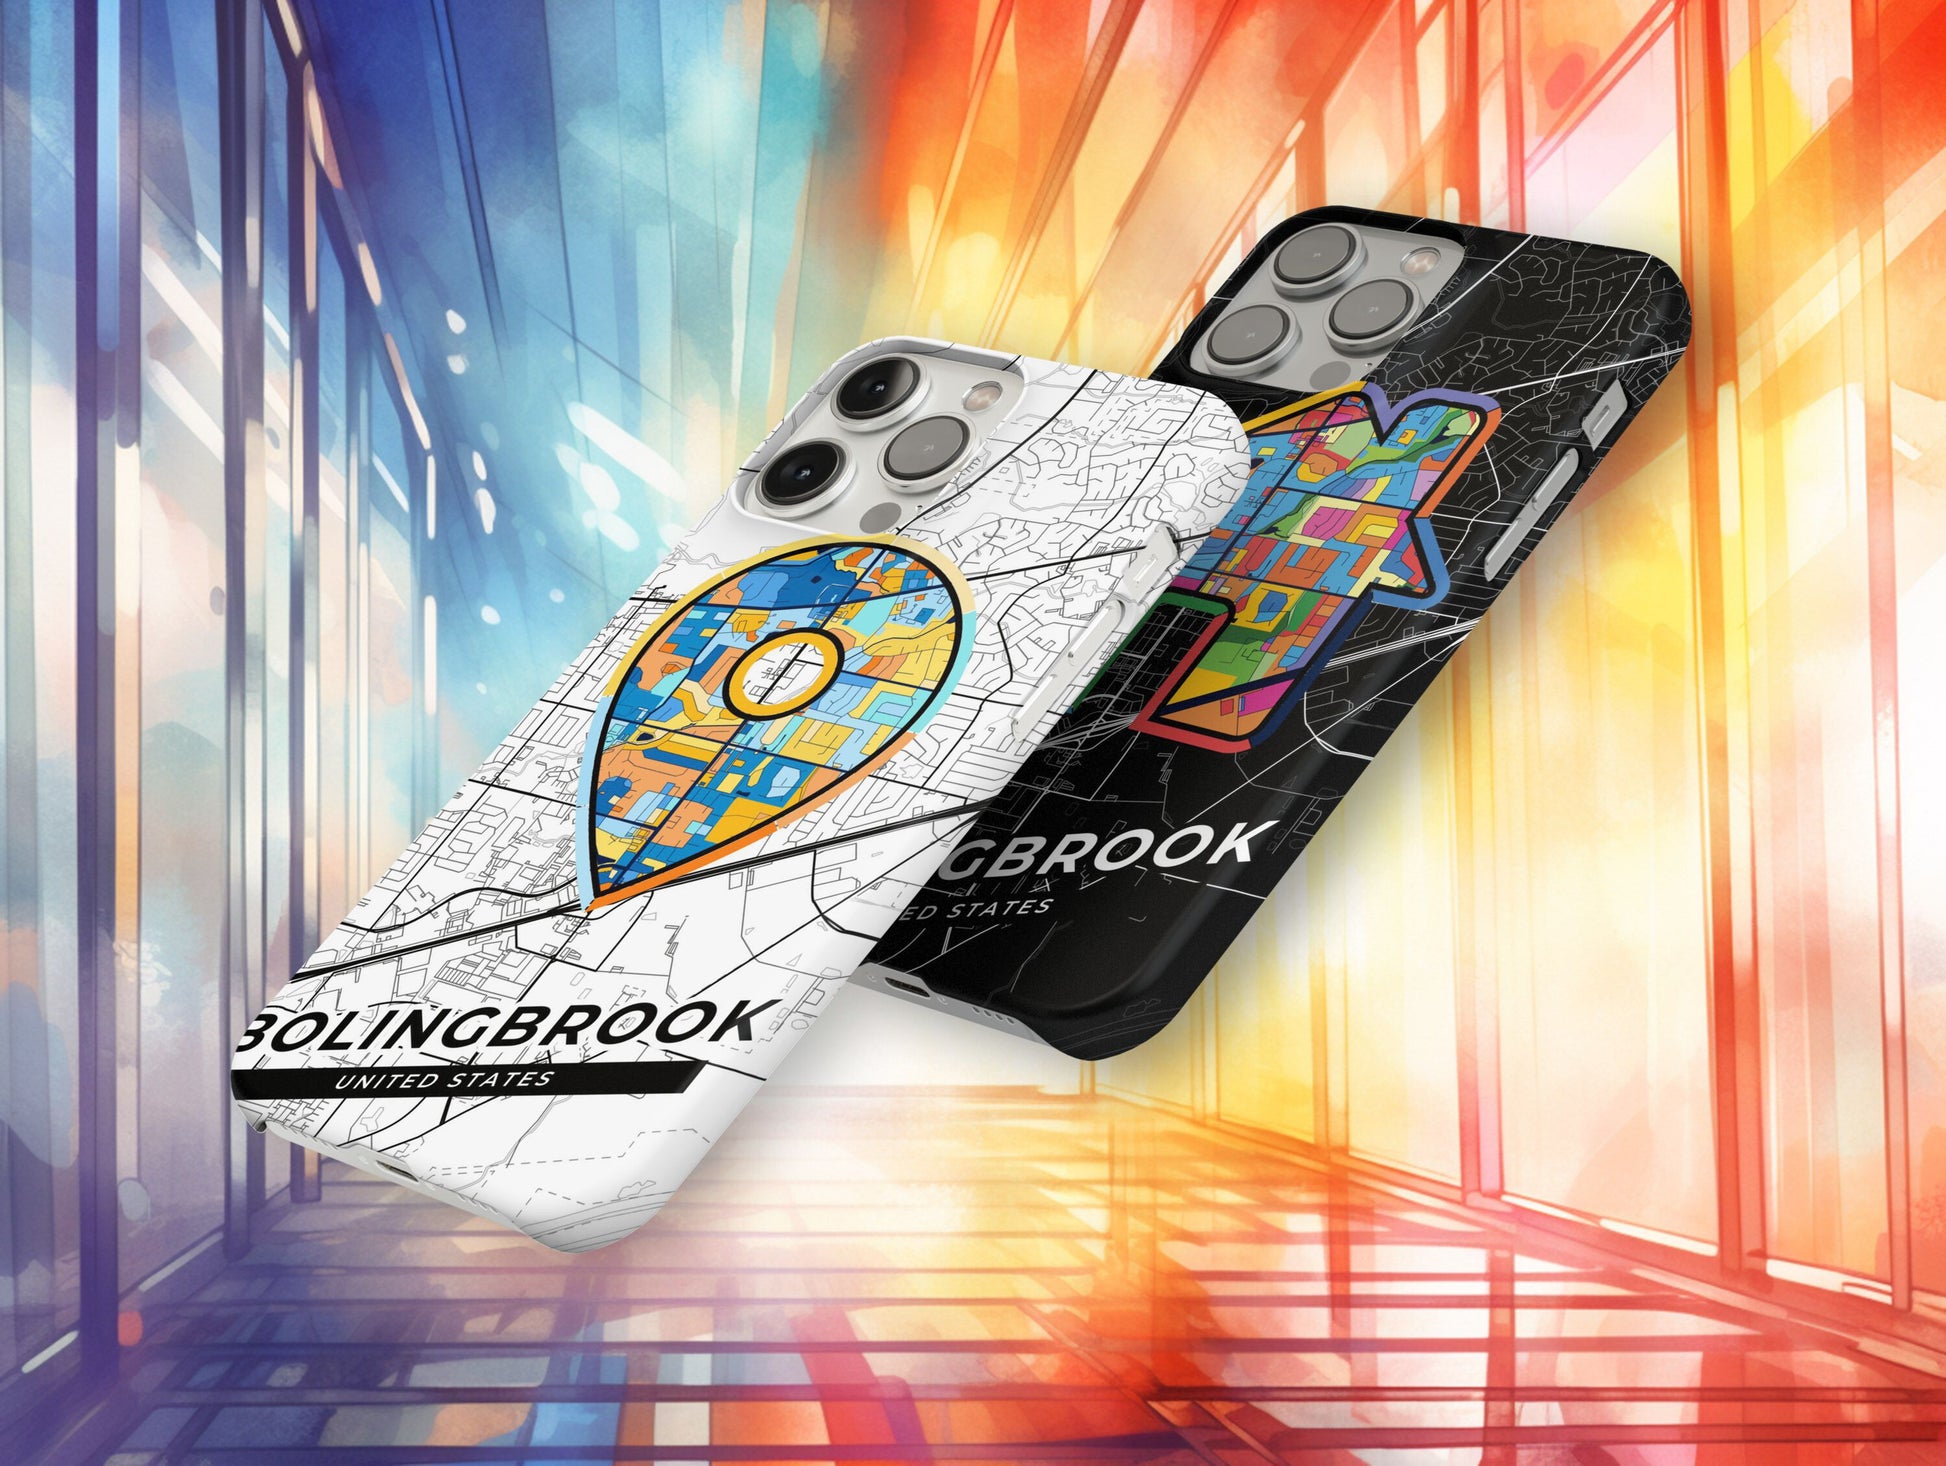 Bolingbrook Illinois slim phone case with colorful icon. Birthday, wedding or housewarming gift. Couple match cases.